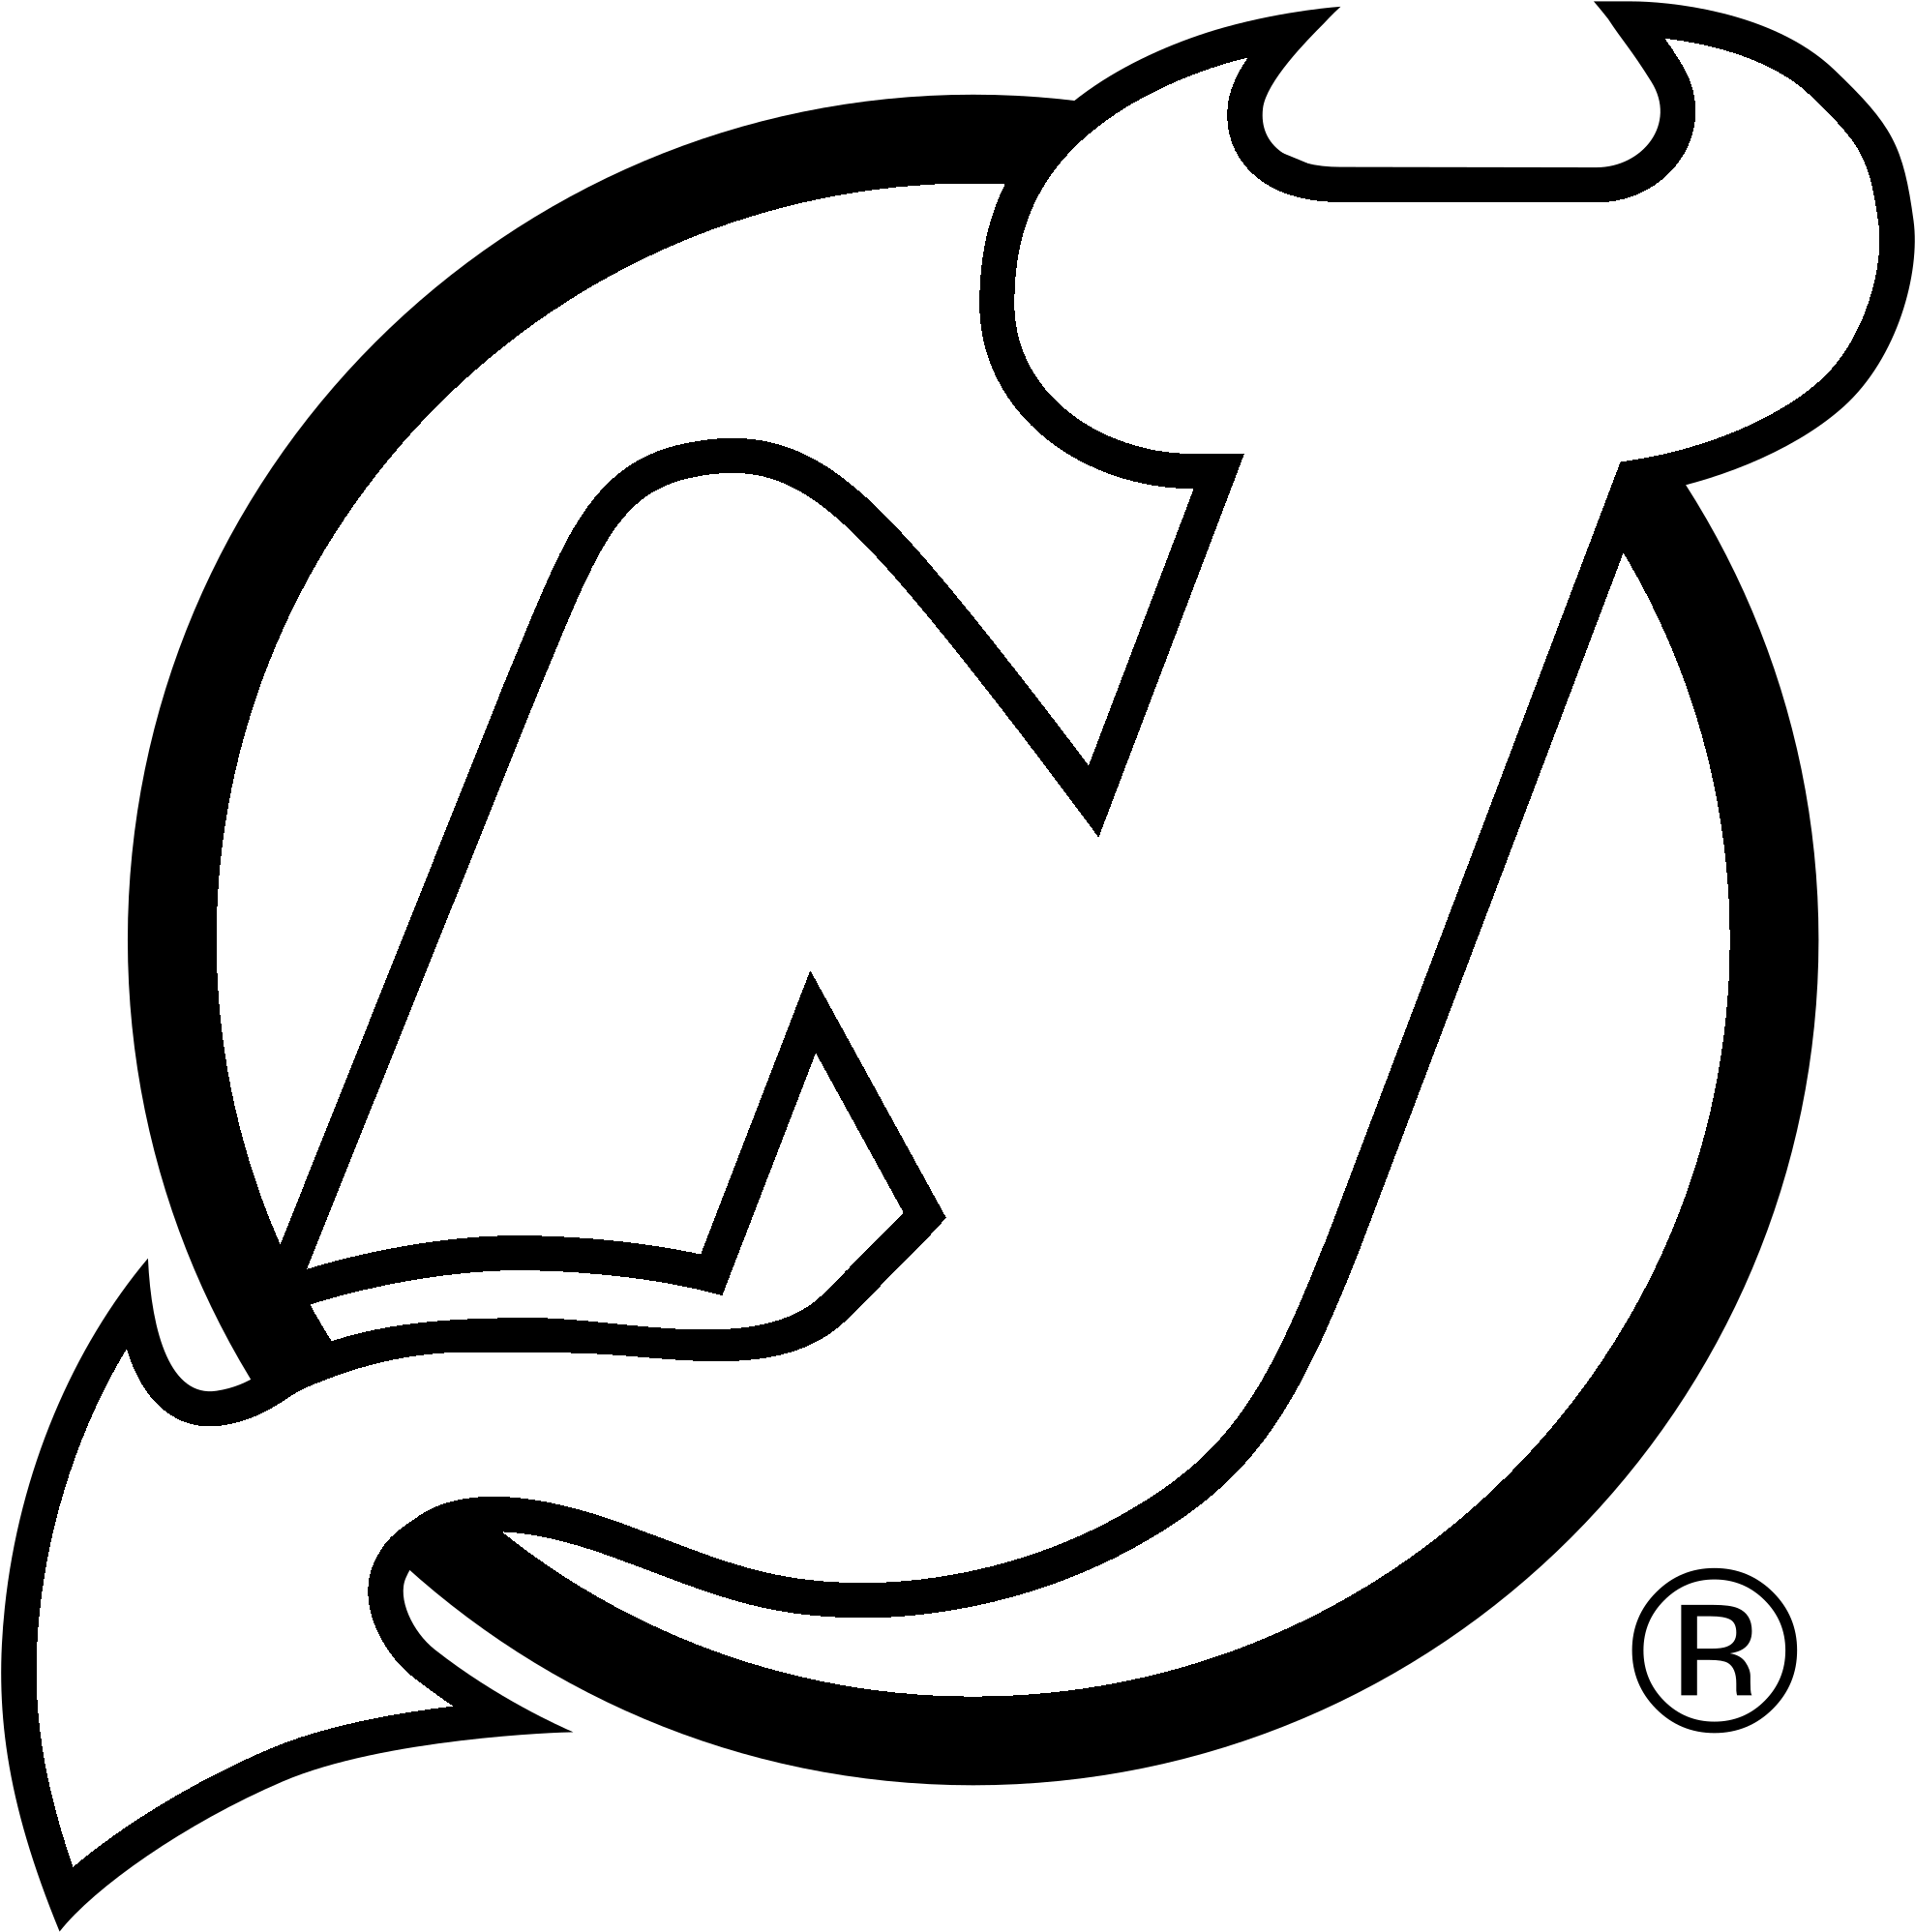 Download and share clipart about Drawing Delightful New Jersey Devils Logo ...